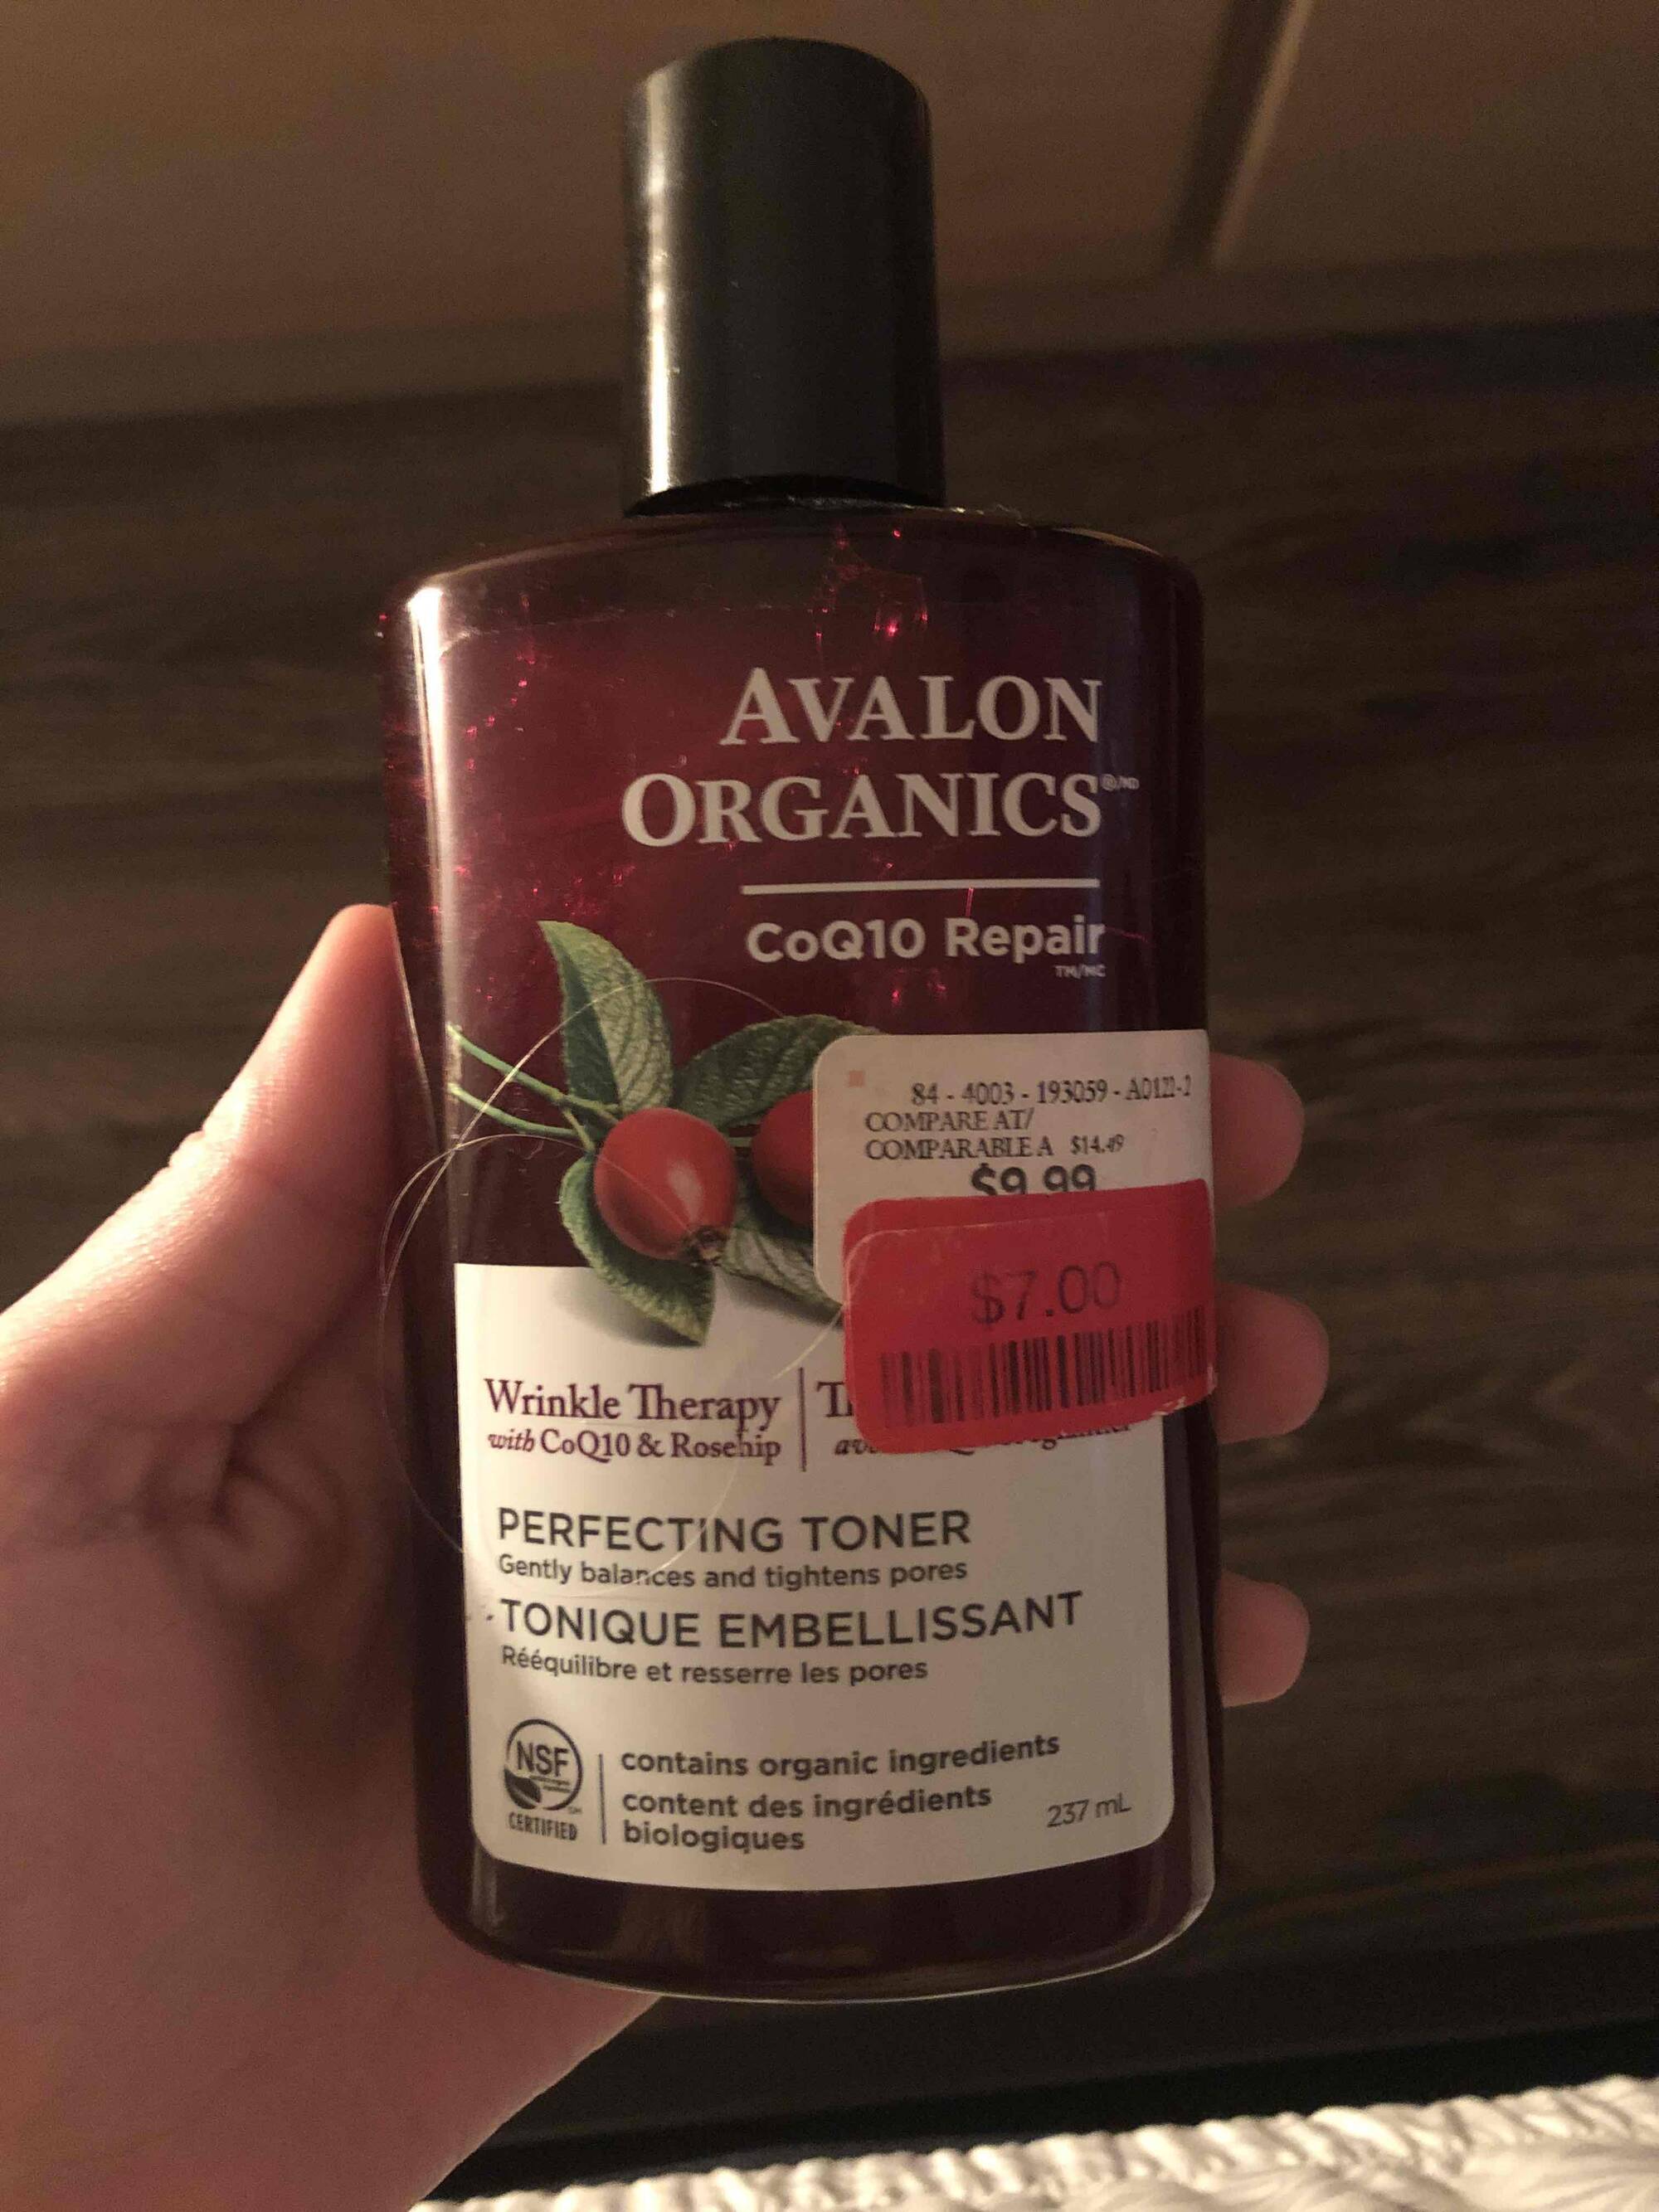 AVALON ORGANICS - Wrinkle therapy - Tonique embellissant